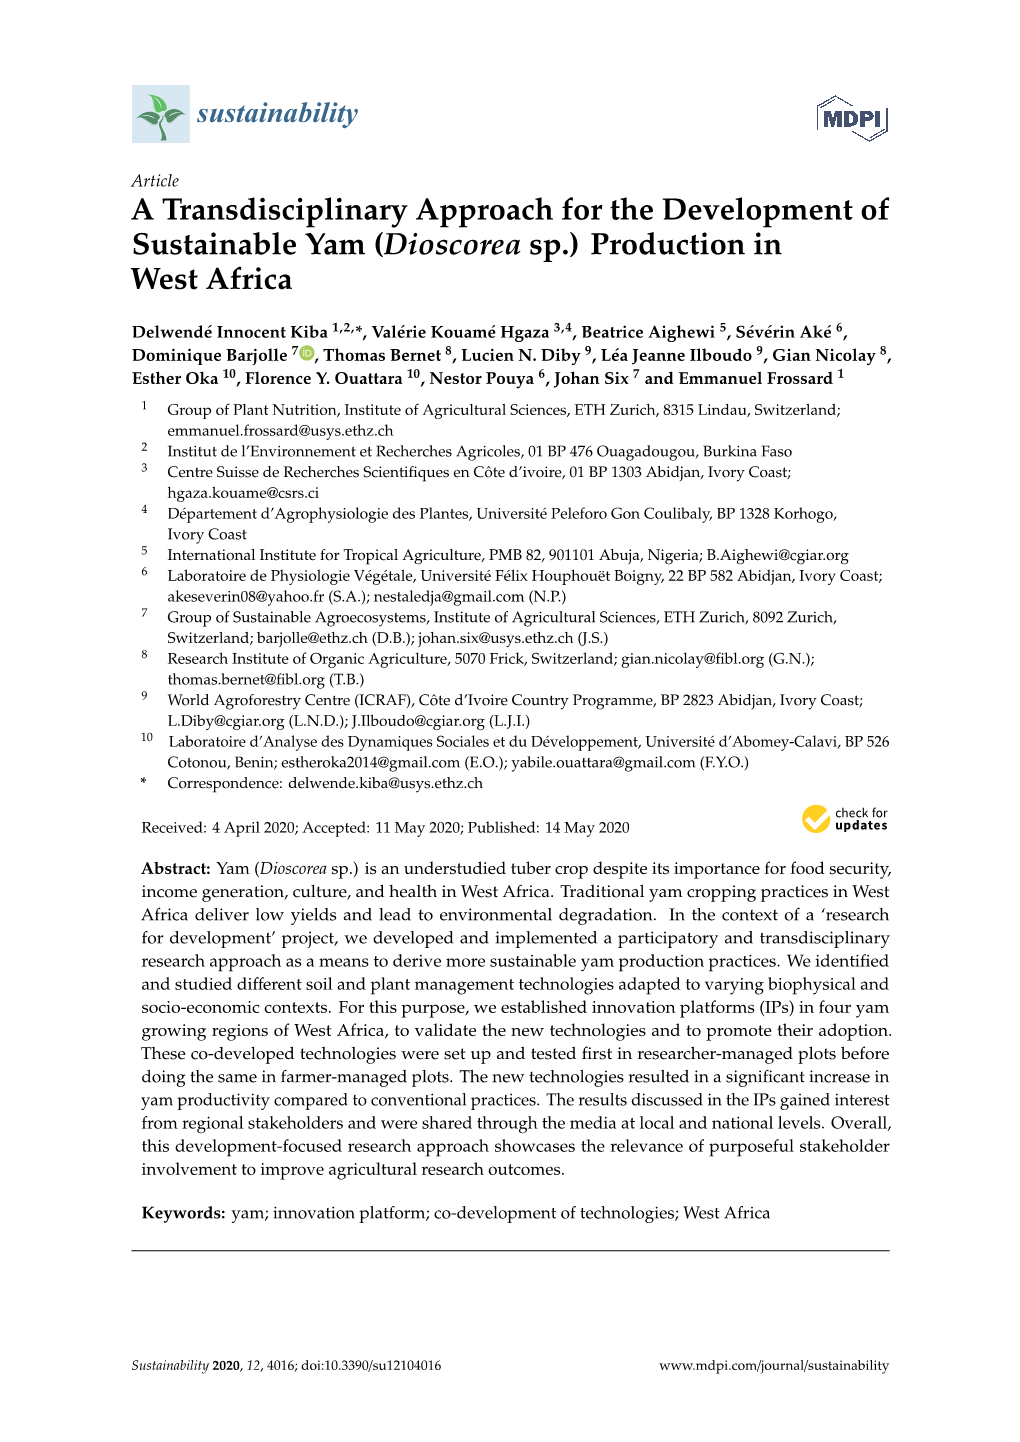 A Transdisciplinary Approach for the Development of Sustainable Yam (Dioscorea Sp.) Production in West Africa